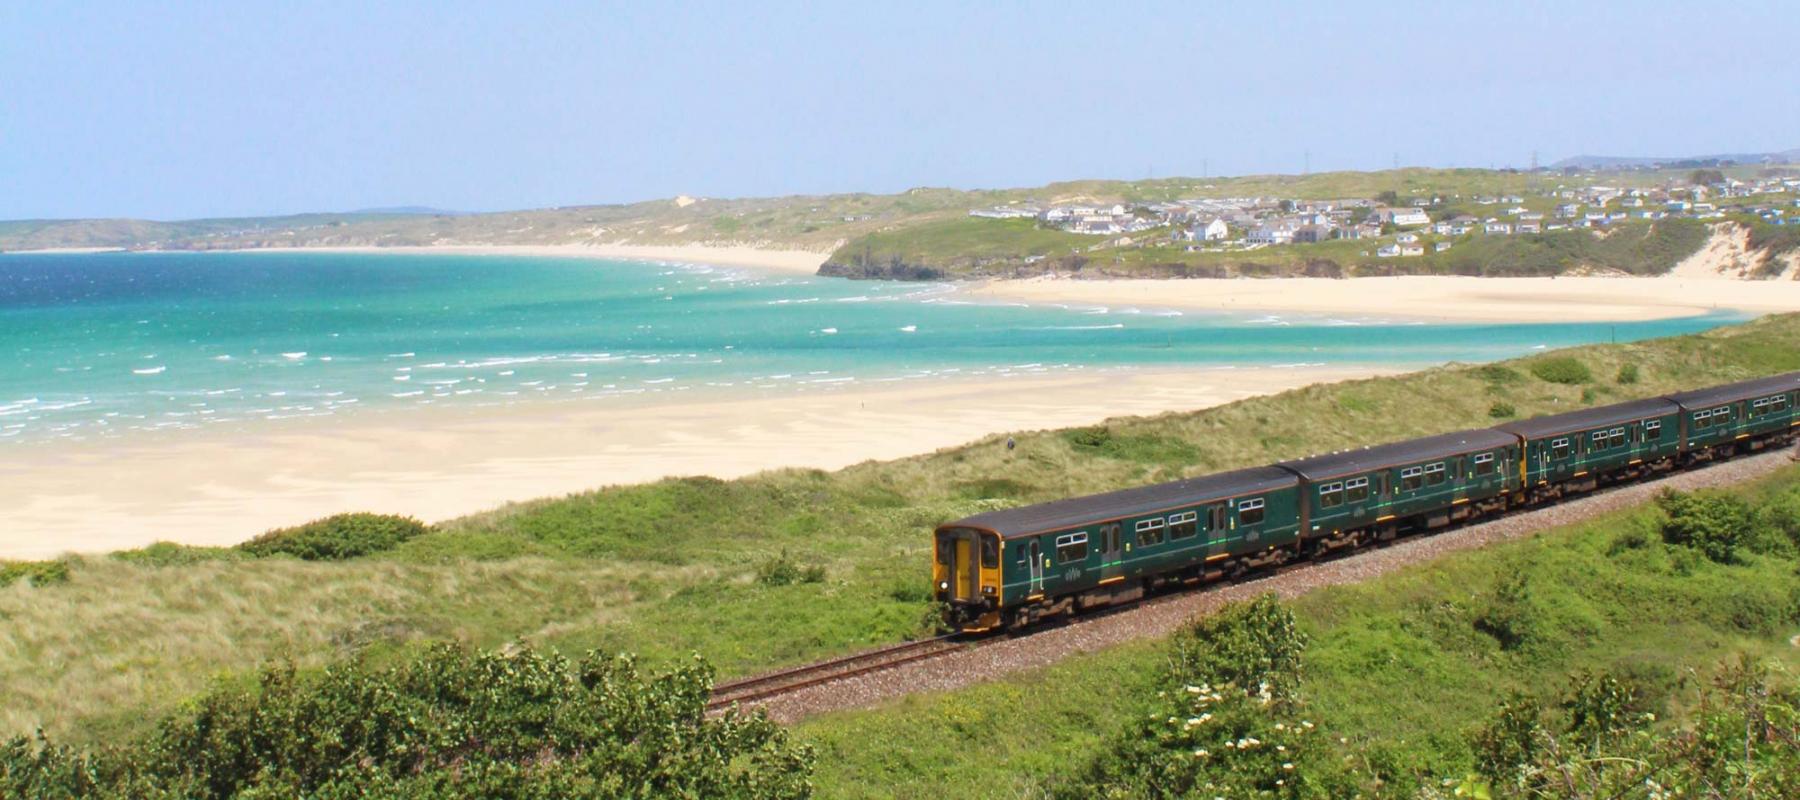 GWR train on the St Ives Bay Line